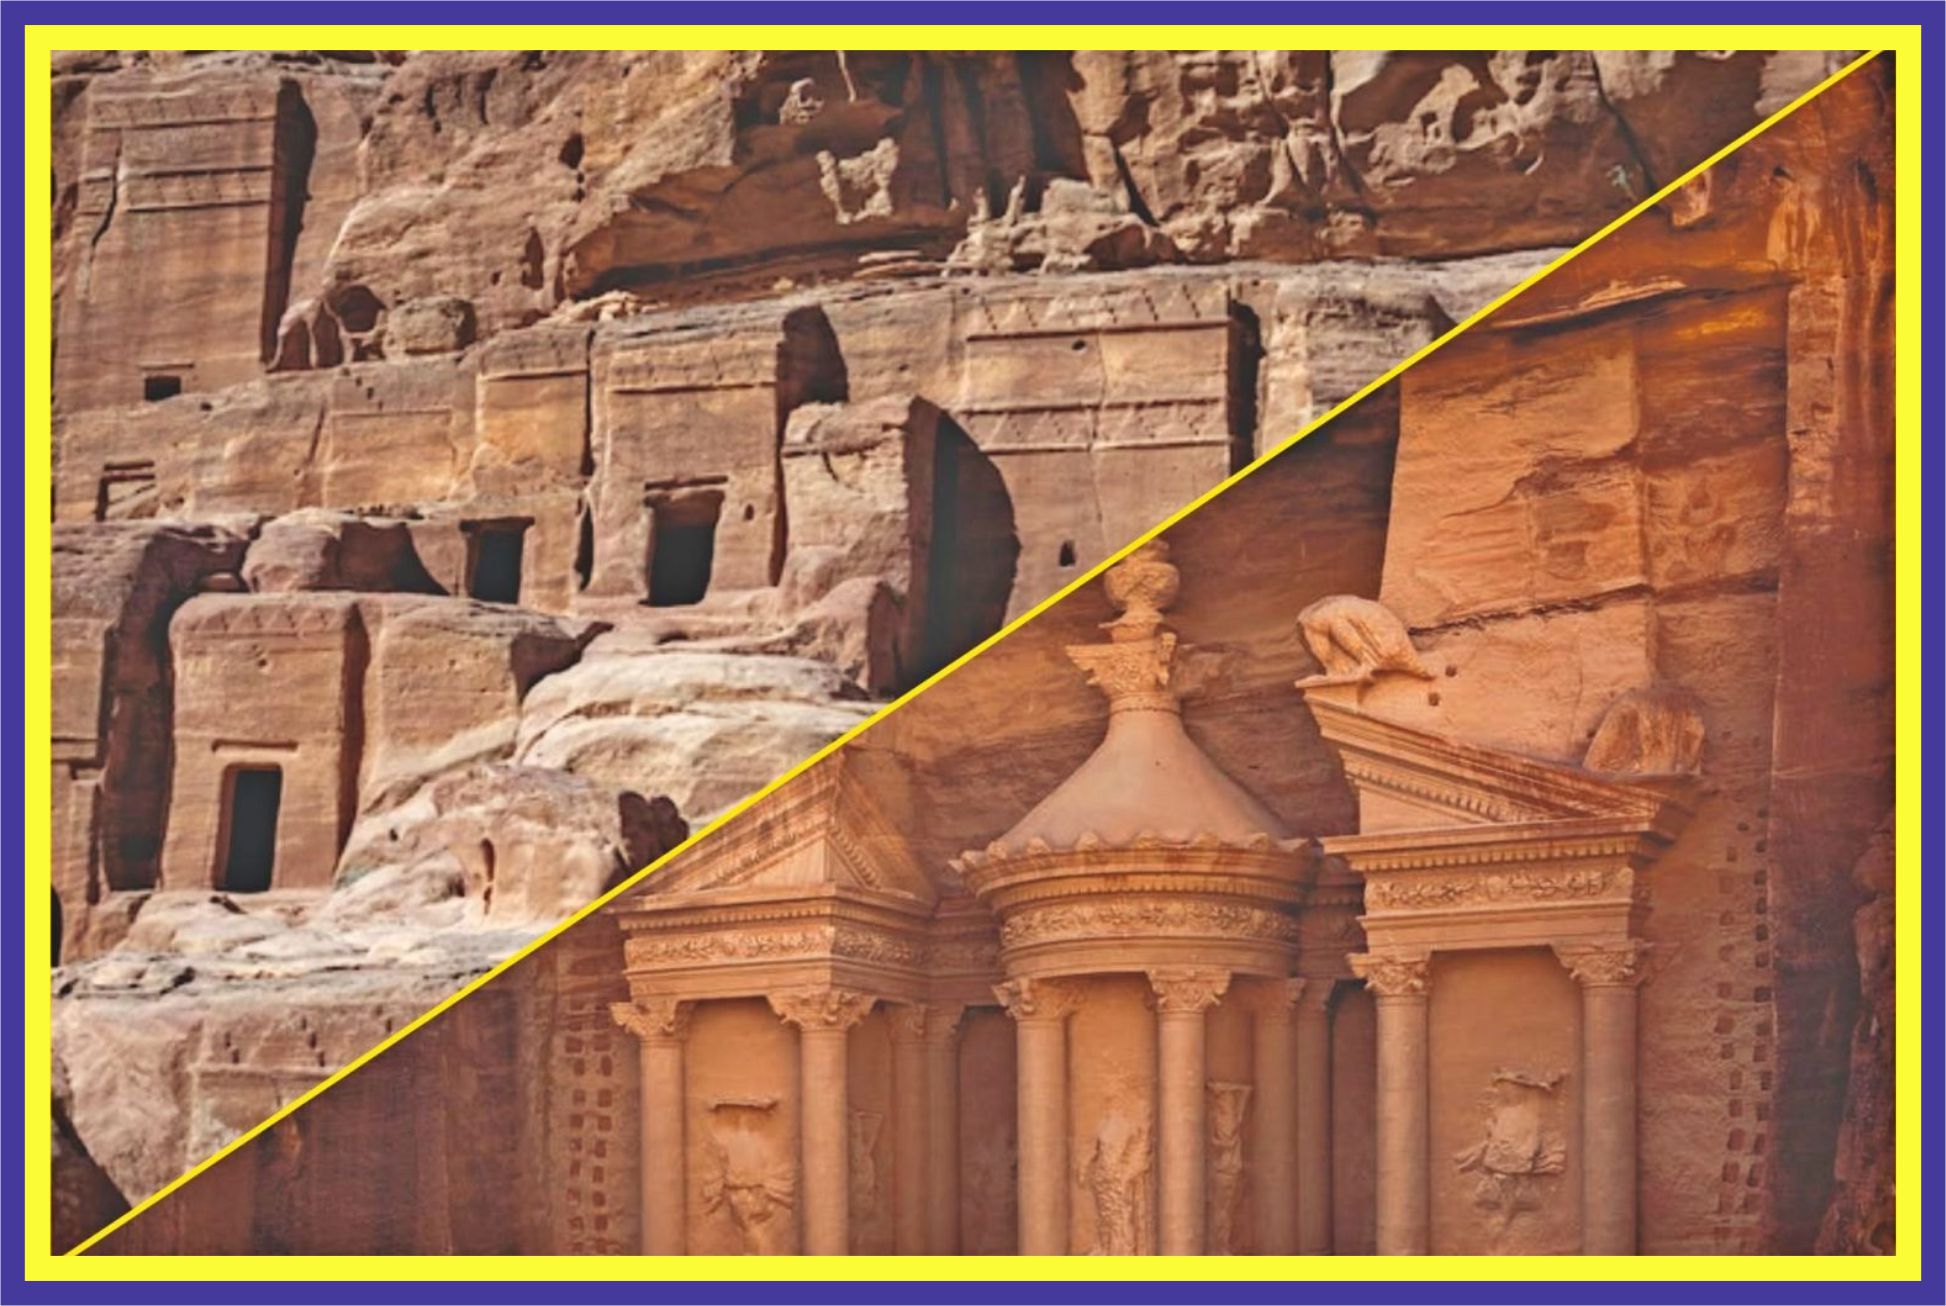 private Petra day tours; via Jordan travel & tours; Petra tour packages; guided Petra tours; Petra sightseeing tours; exclusive Petra experiences; luxury Petra excursions; personalized Petra visits; Petra archaeological tours; local Petra guide; secret Petra spots; hidden Petra gems; off-the-beaten-path Petra; Jordan travel experts; local travel agency; Petra history exploration; photogenic Petra locations; bespoke Petra adventures; picturesque Petra sites; cultural Petra tours; historical Petra walks; small group Petra tours; tailor-made Petra itineraries; discover Petra with locals; ancient Petra ruins; unforgettable Petra memories; Petra tour operators; authentic Petra experiences; best Petra tour company; must-see Petra attractions; recommended Petra tours; insider Petra tips; custom Petra trips; Petra adventure photography; magical Petra day visits; top Petra travel company; specialized Petra guides; Petra tour experts.